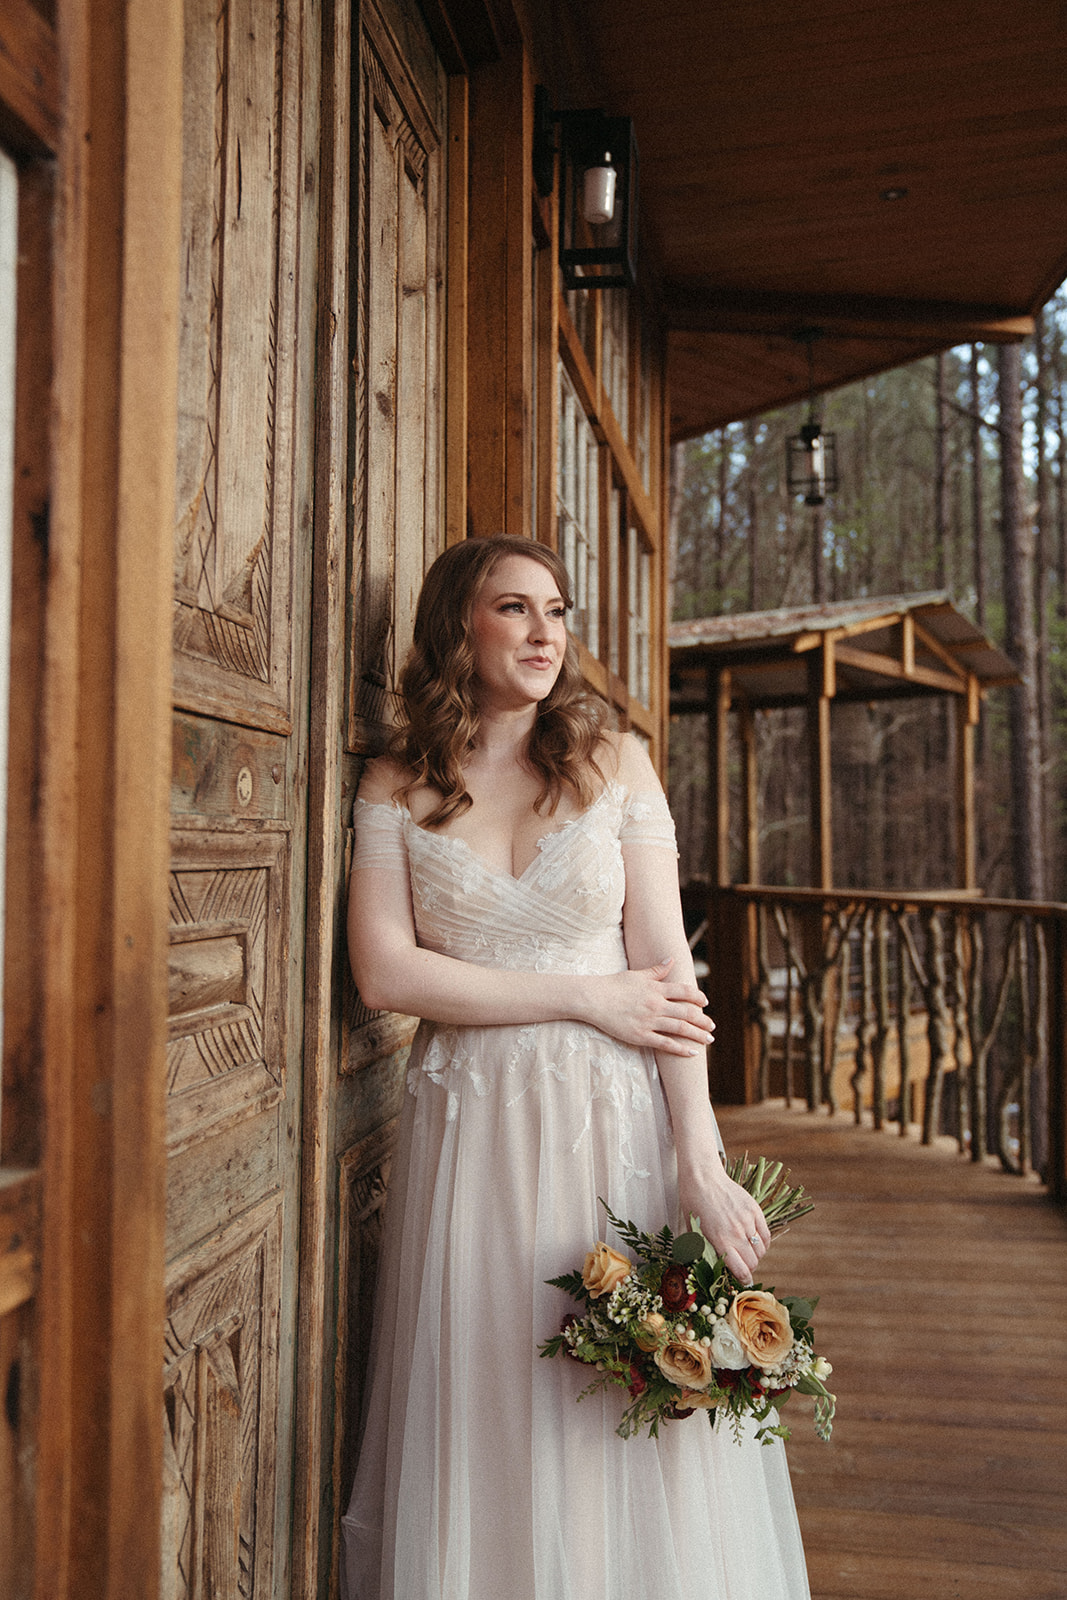 A couple eloped at a treehouse Airbnb in Alabama